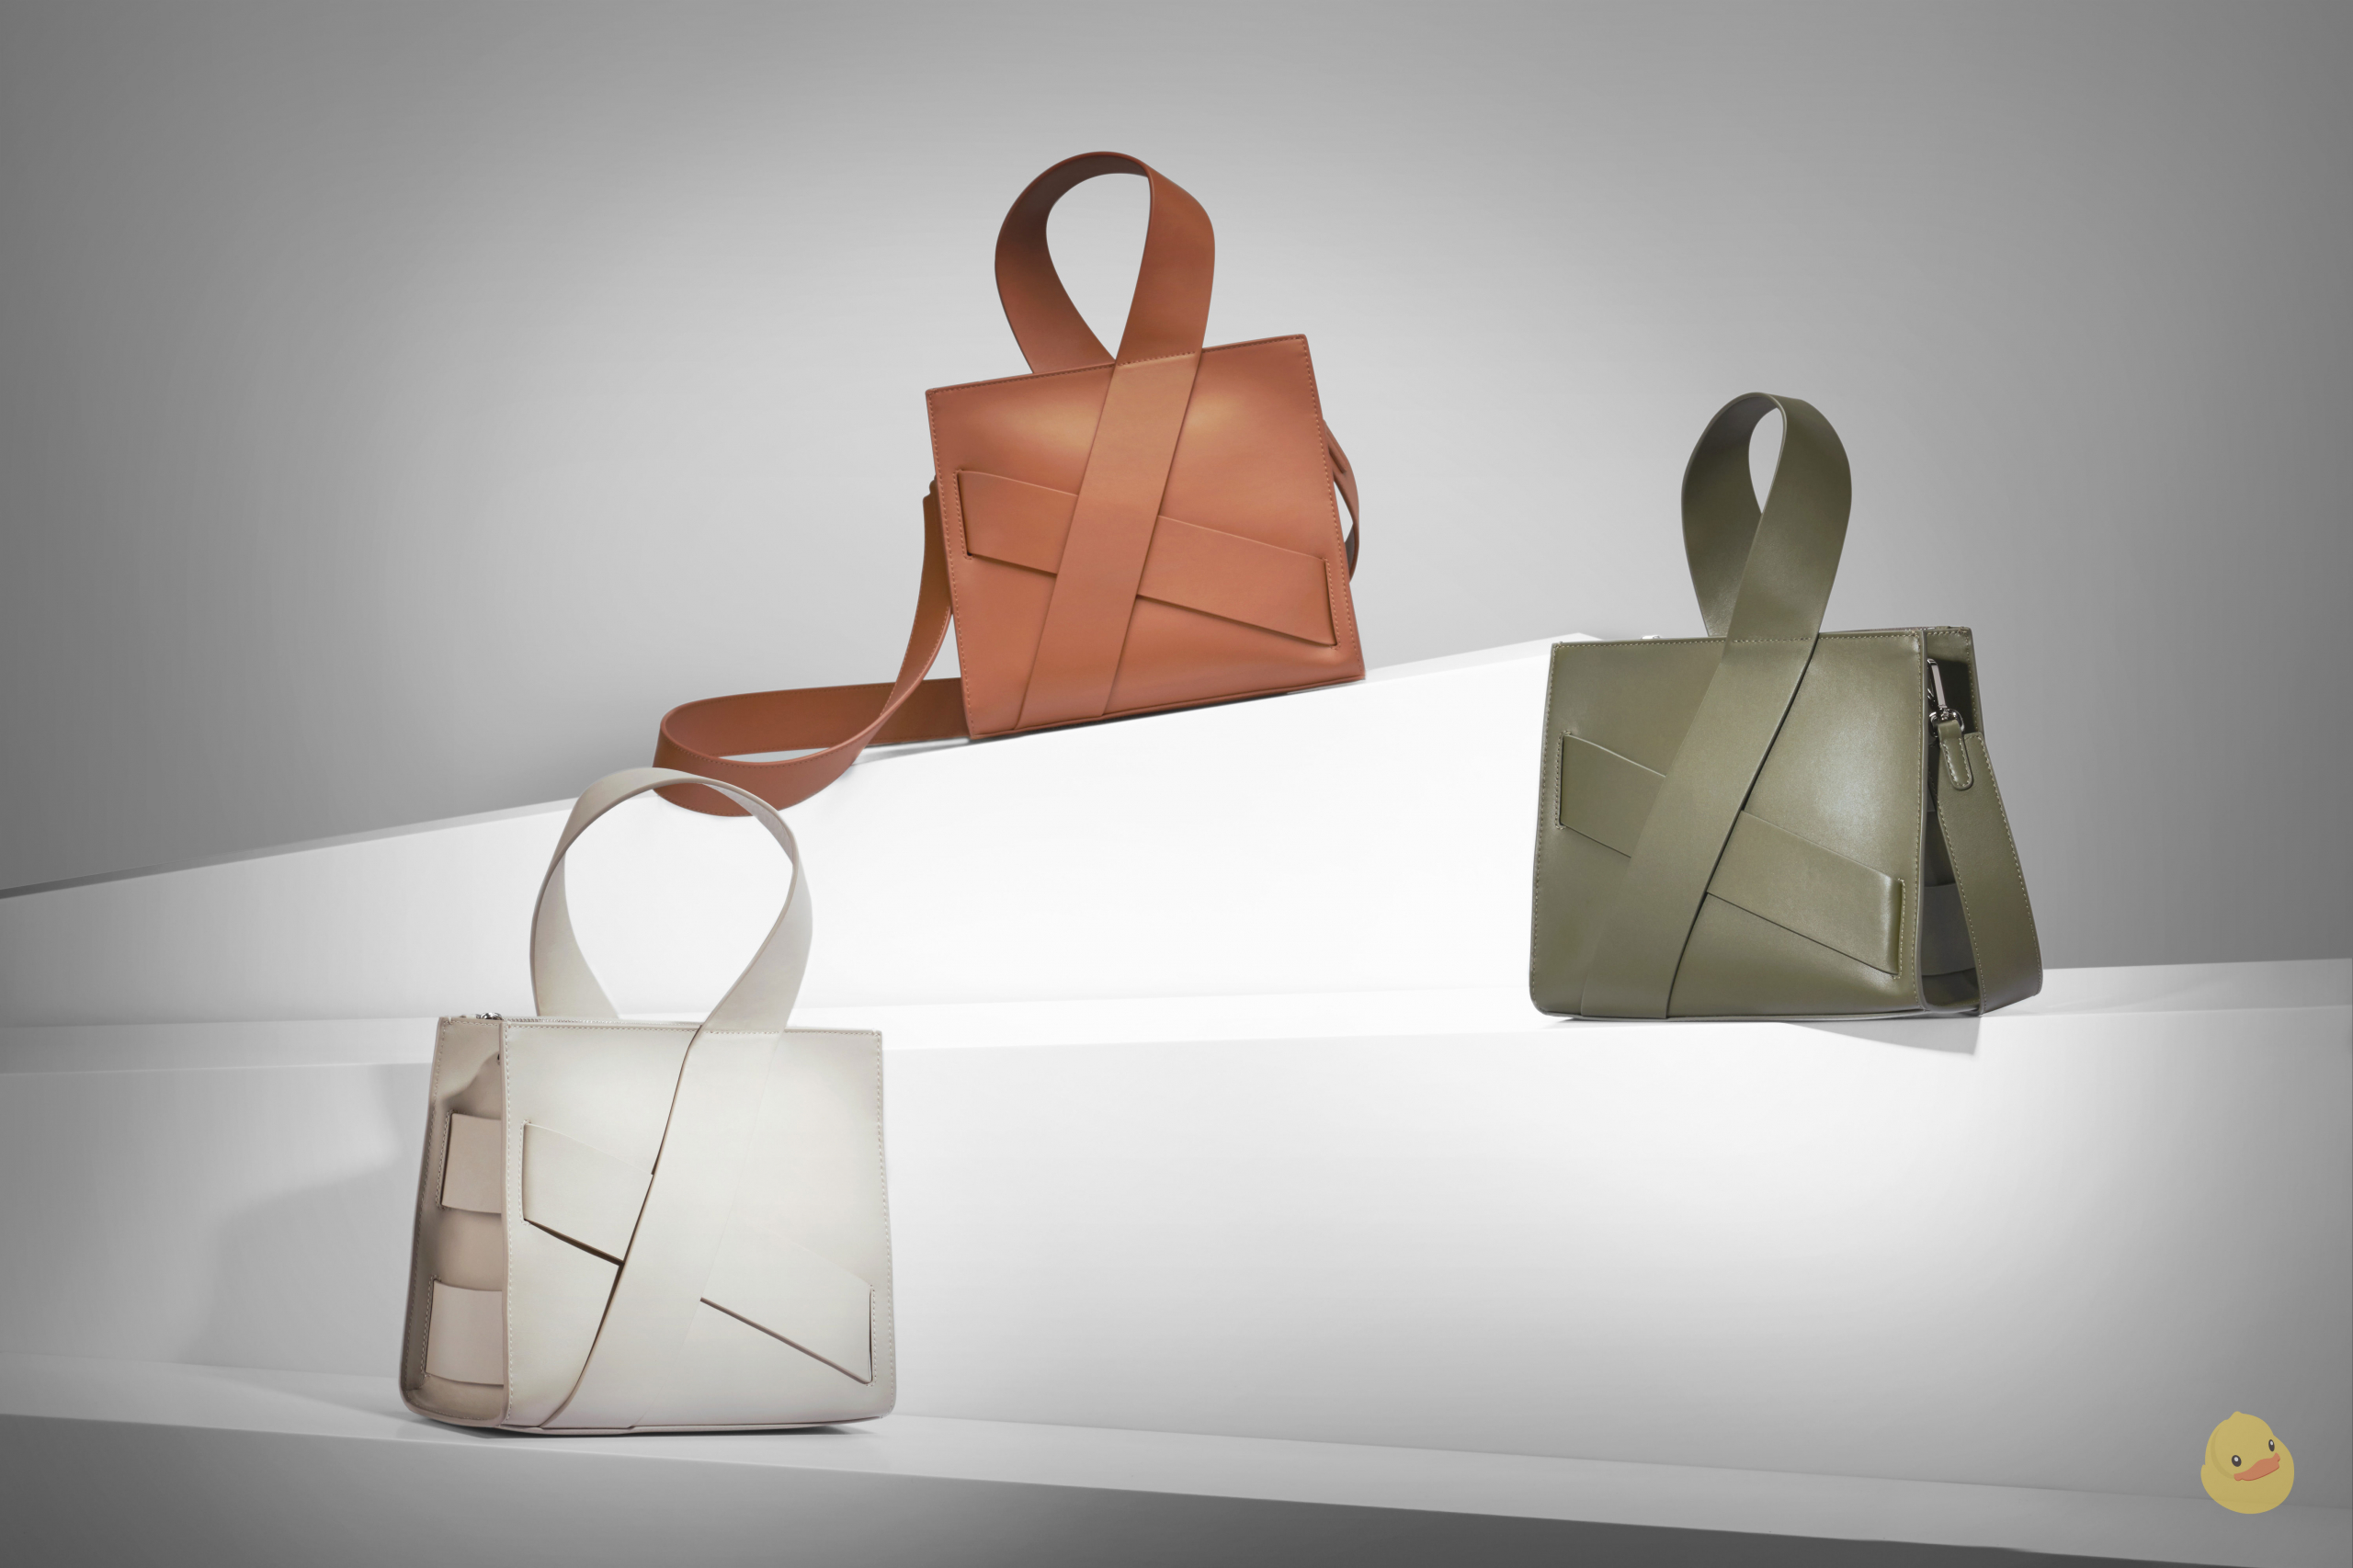 Deabreu Bags Case Study: Unraveling the Story Behind Products Through ...